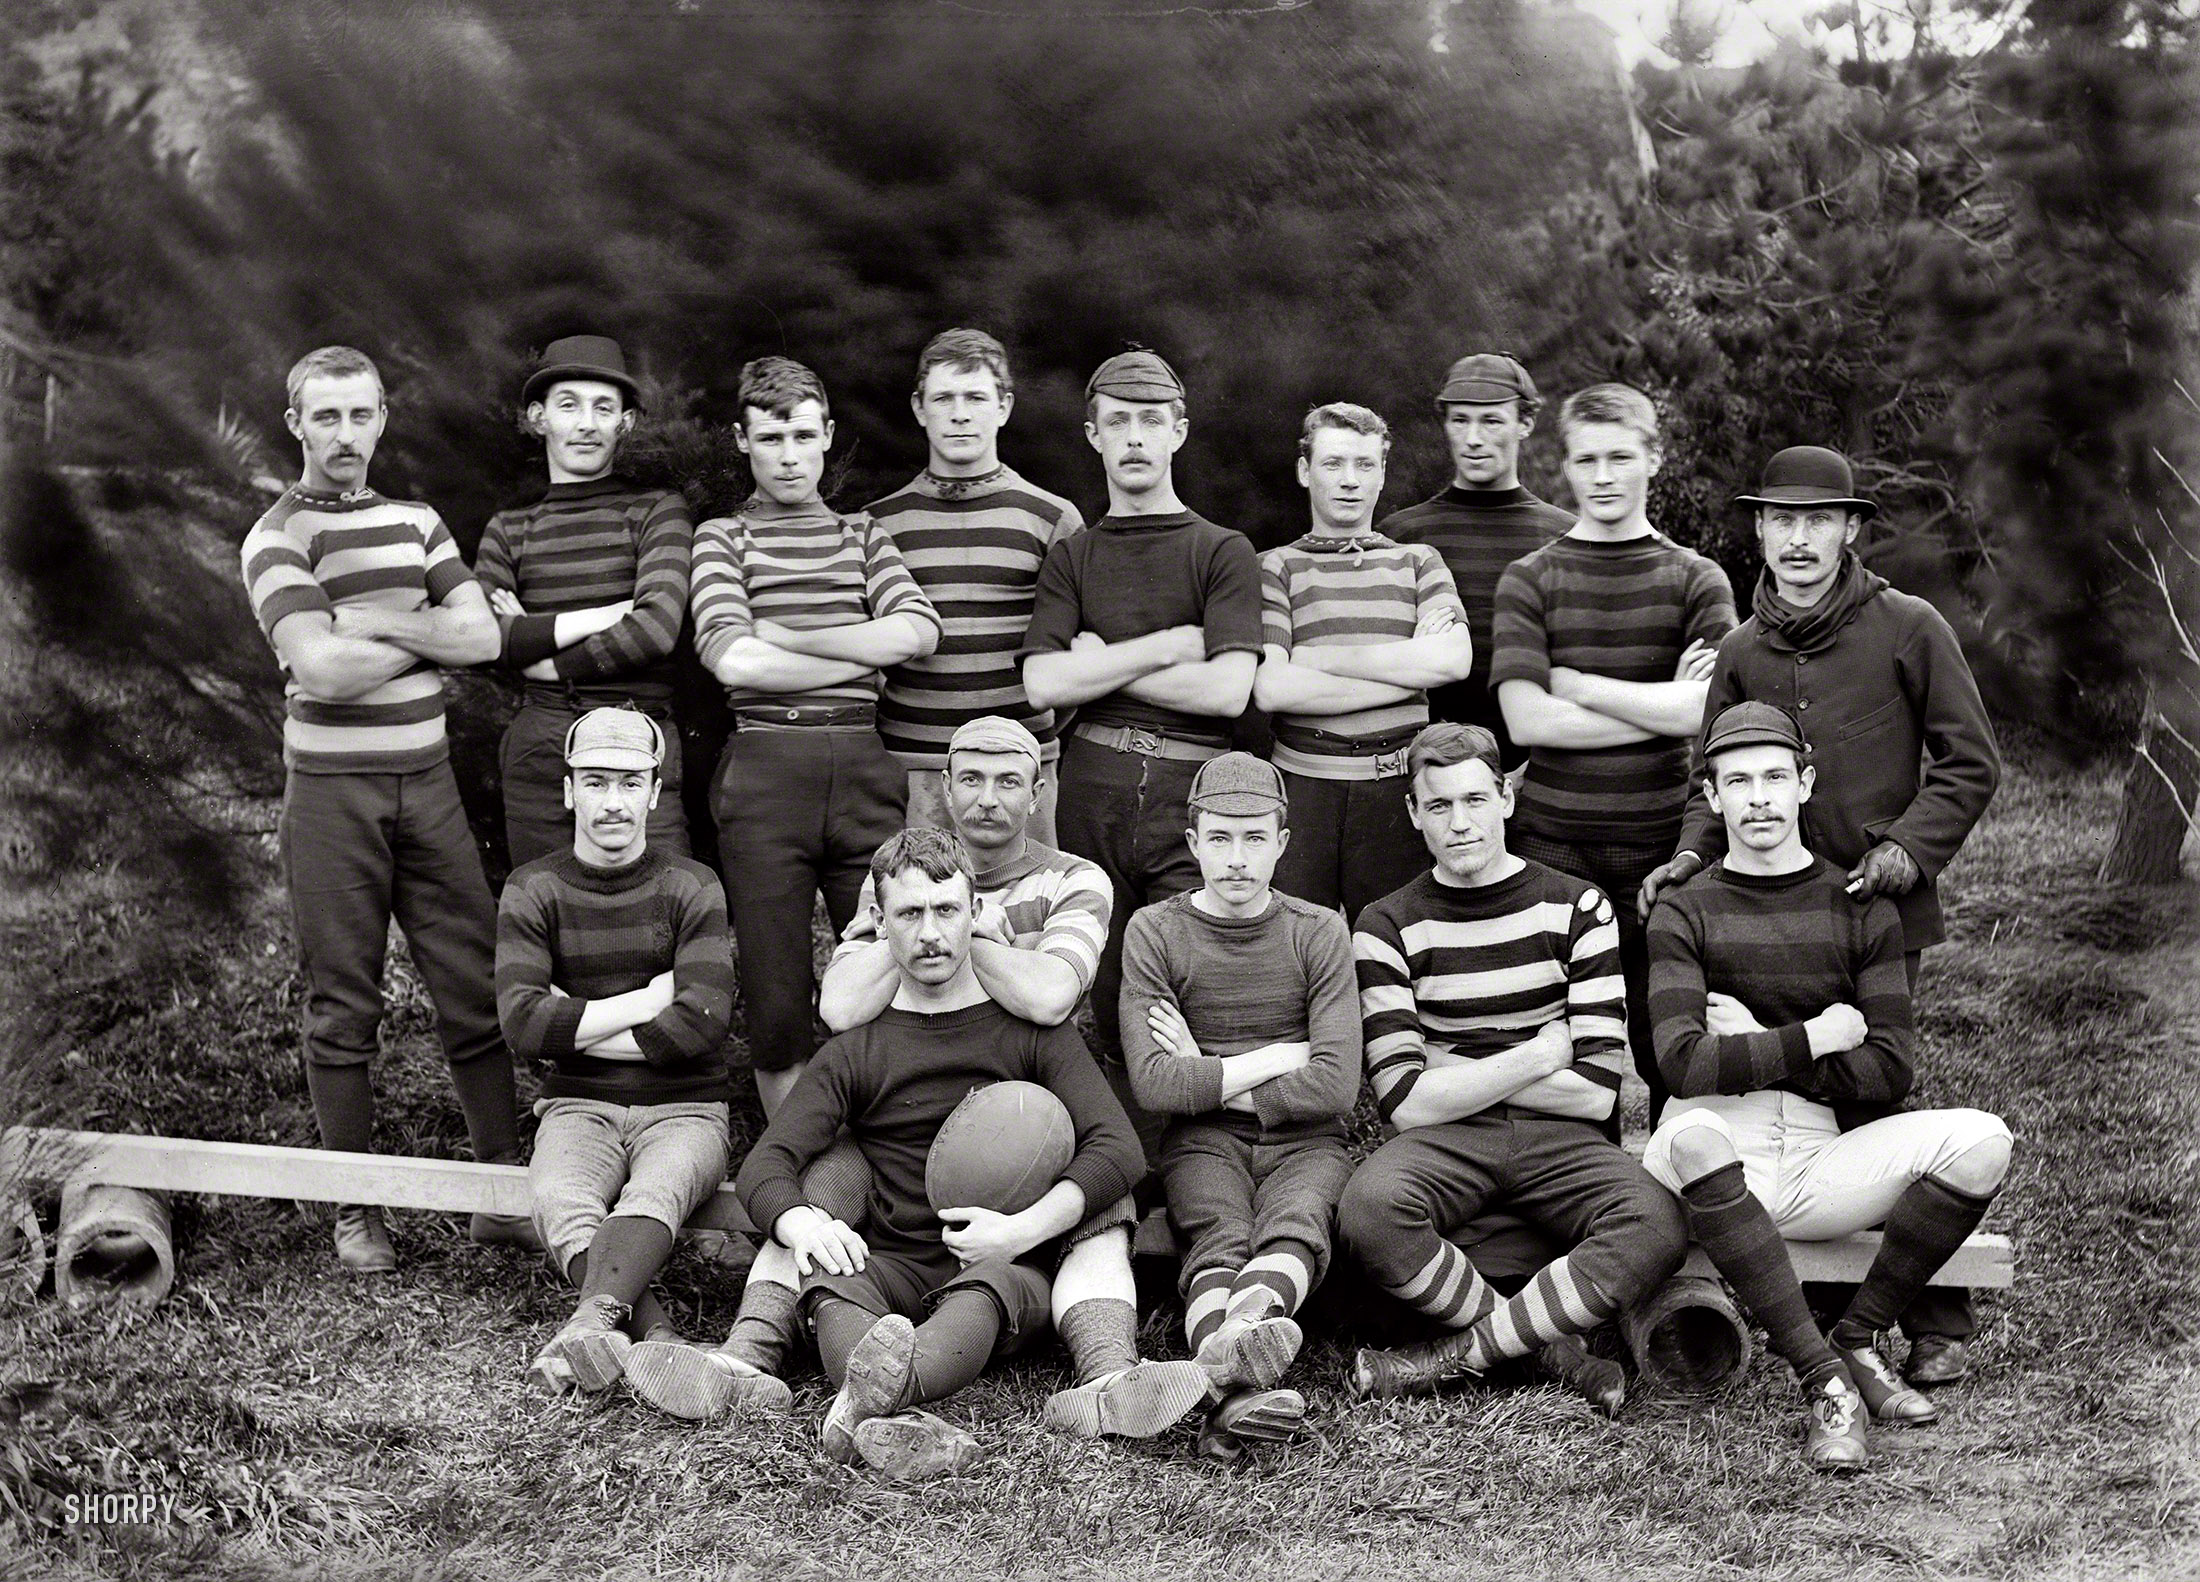 Wellington, New Zealand, 1890. "Post and Telegraph Department football team with men in rugby football kit. Postmaster William Copeland seated behind man with ball." Glass negative by Frederick James Halse. View full size.